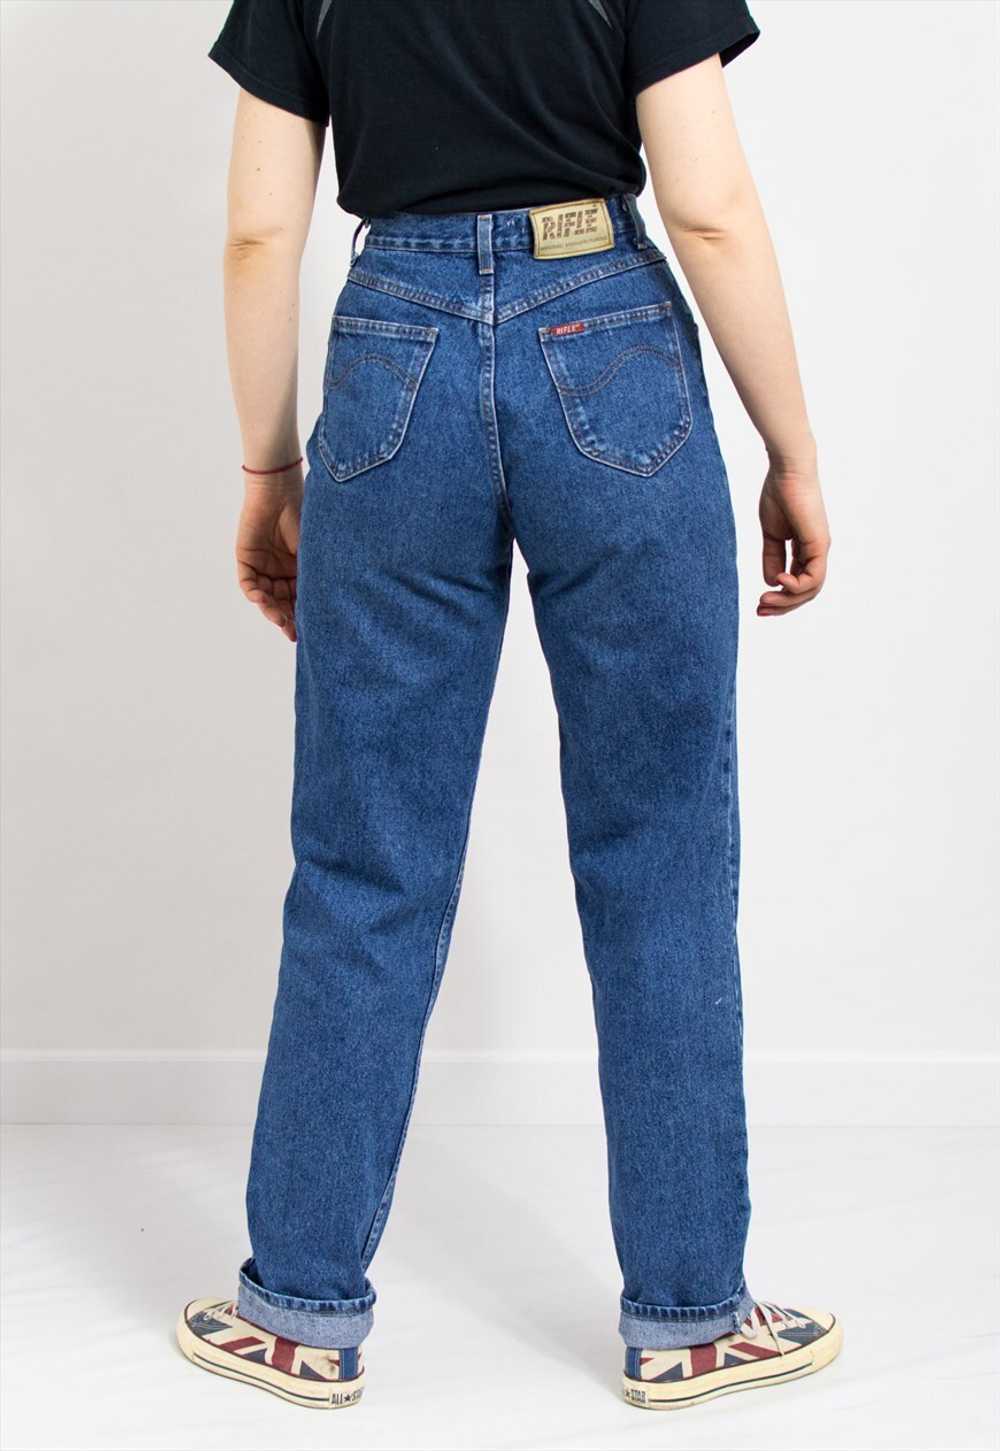 Vintage 90's mom jeans RIFLE extra long leg taper… - image 2